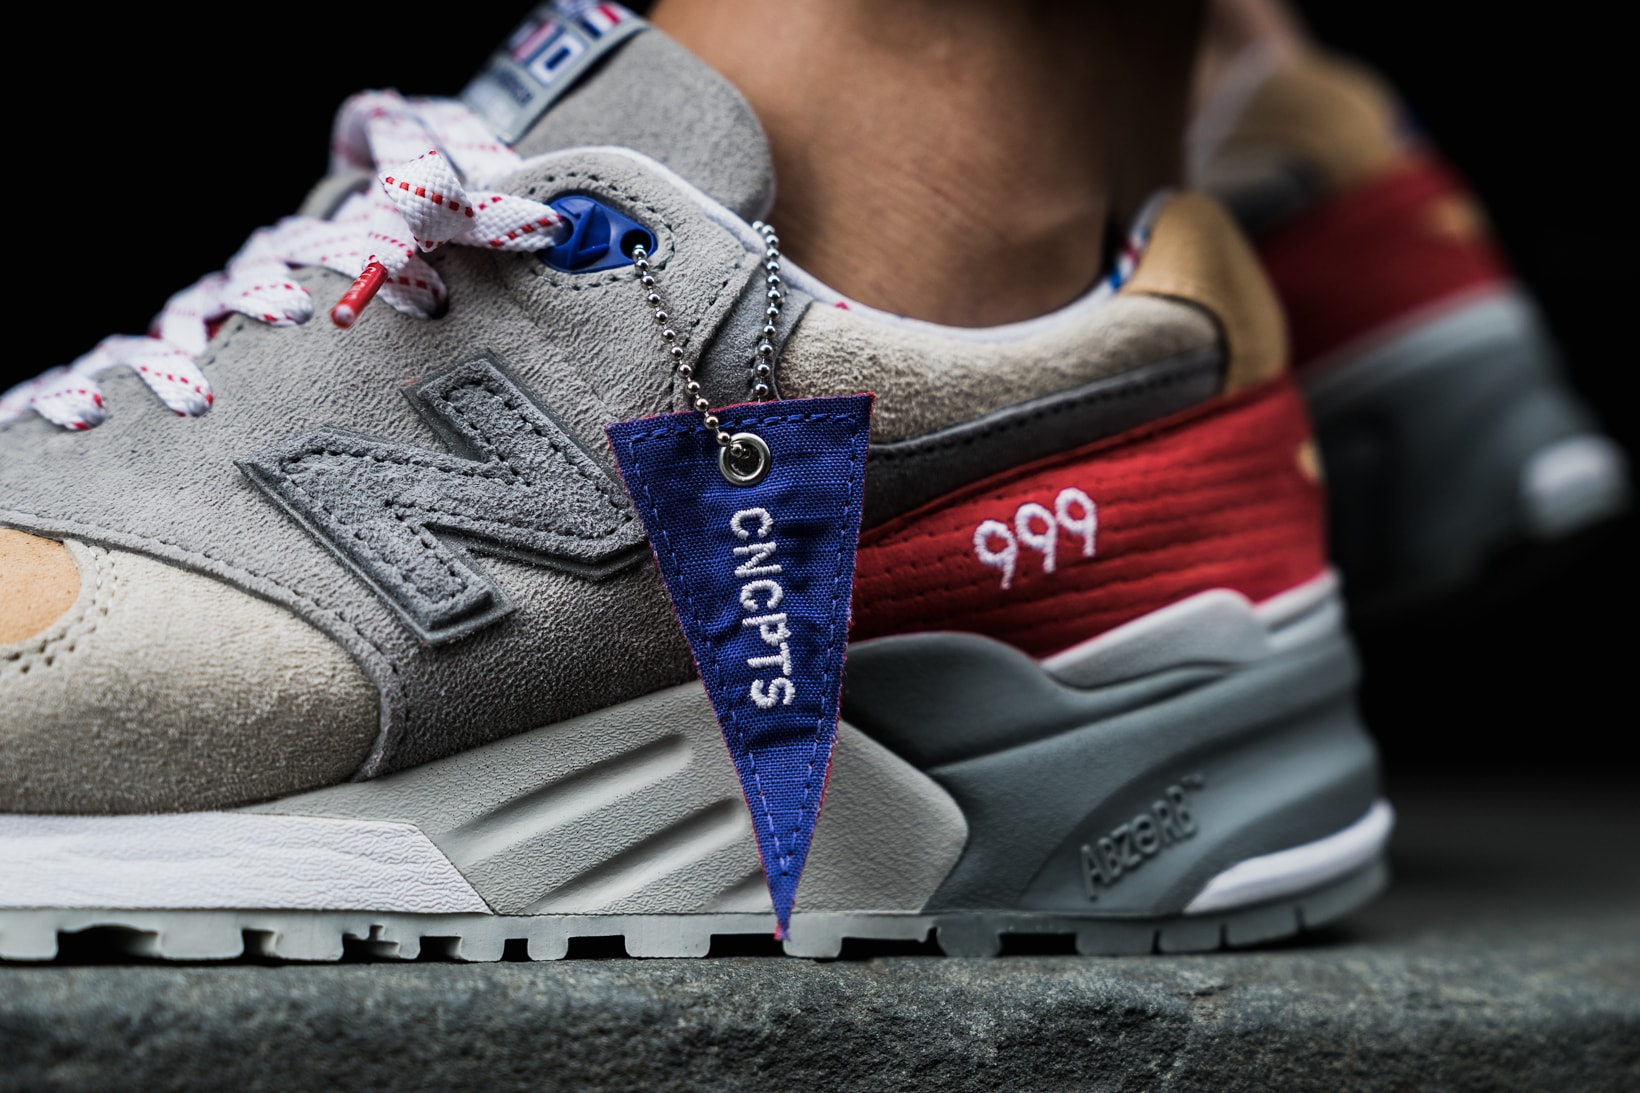 Concepts New Balance 999 Kennedy Hyannis Closer Look Footwear Red White Blue Grey Release Date Info Drops